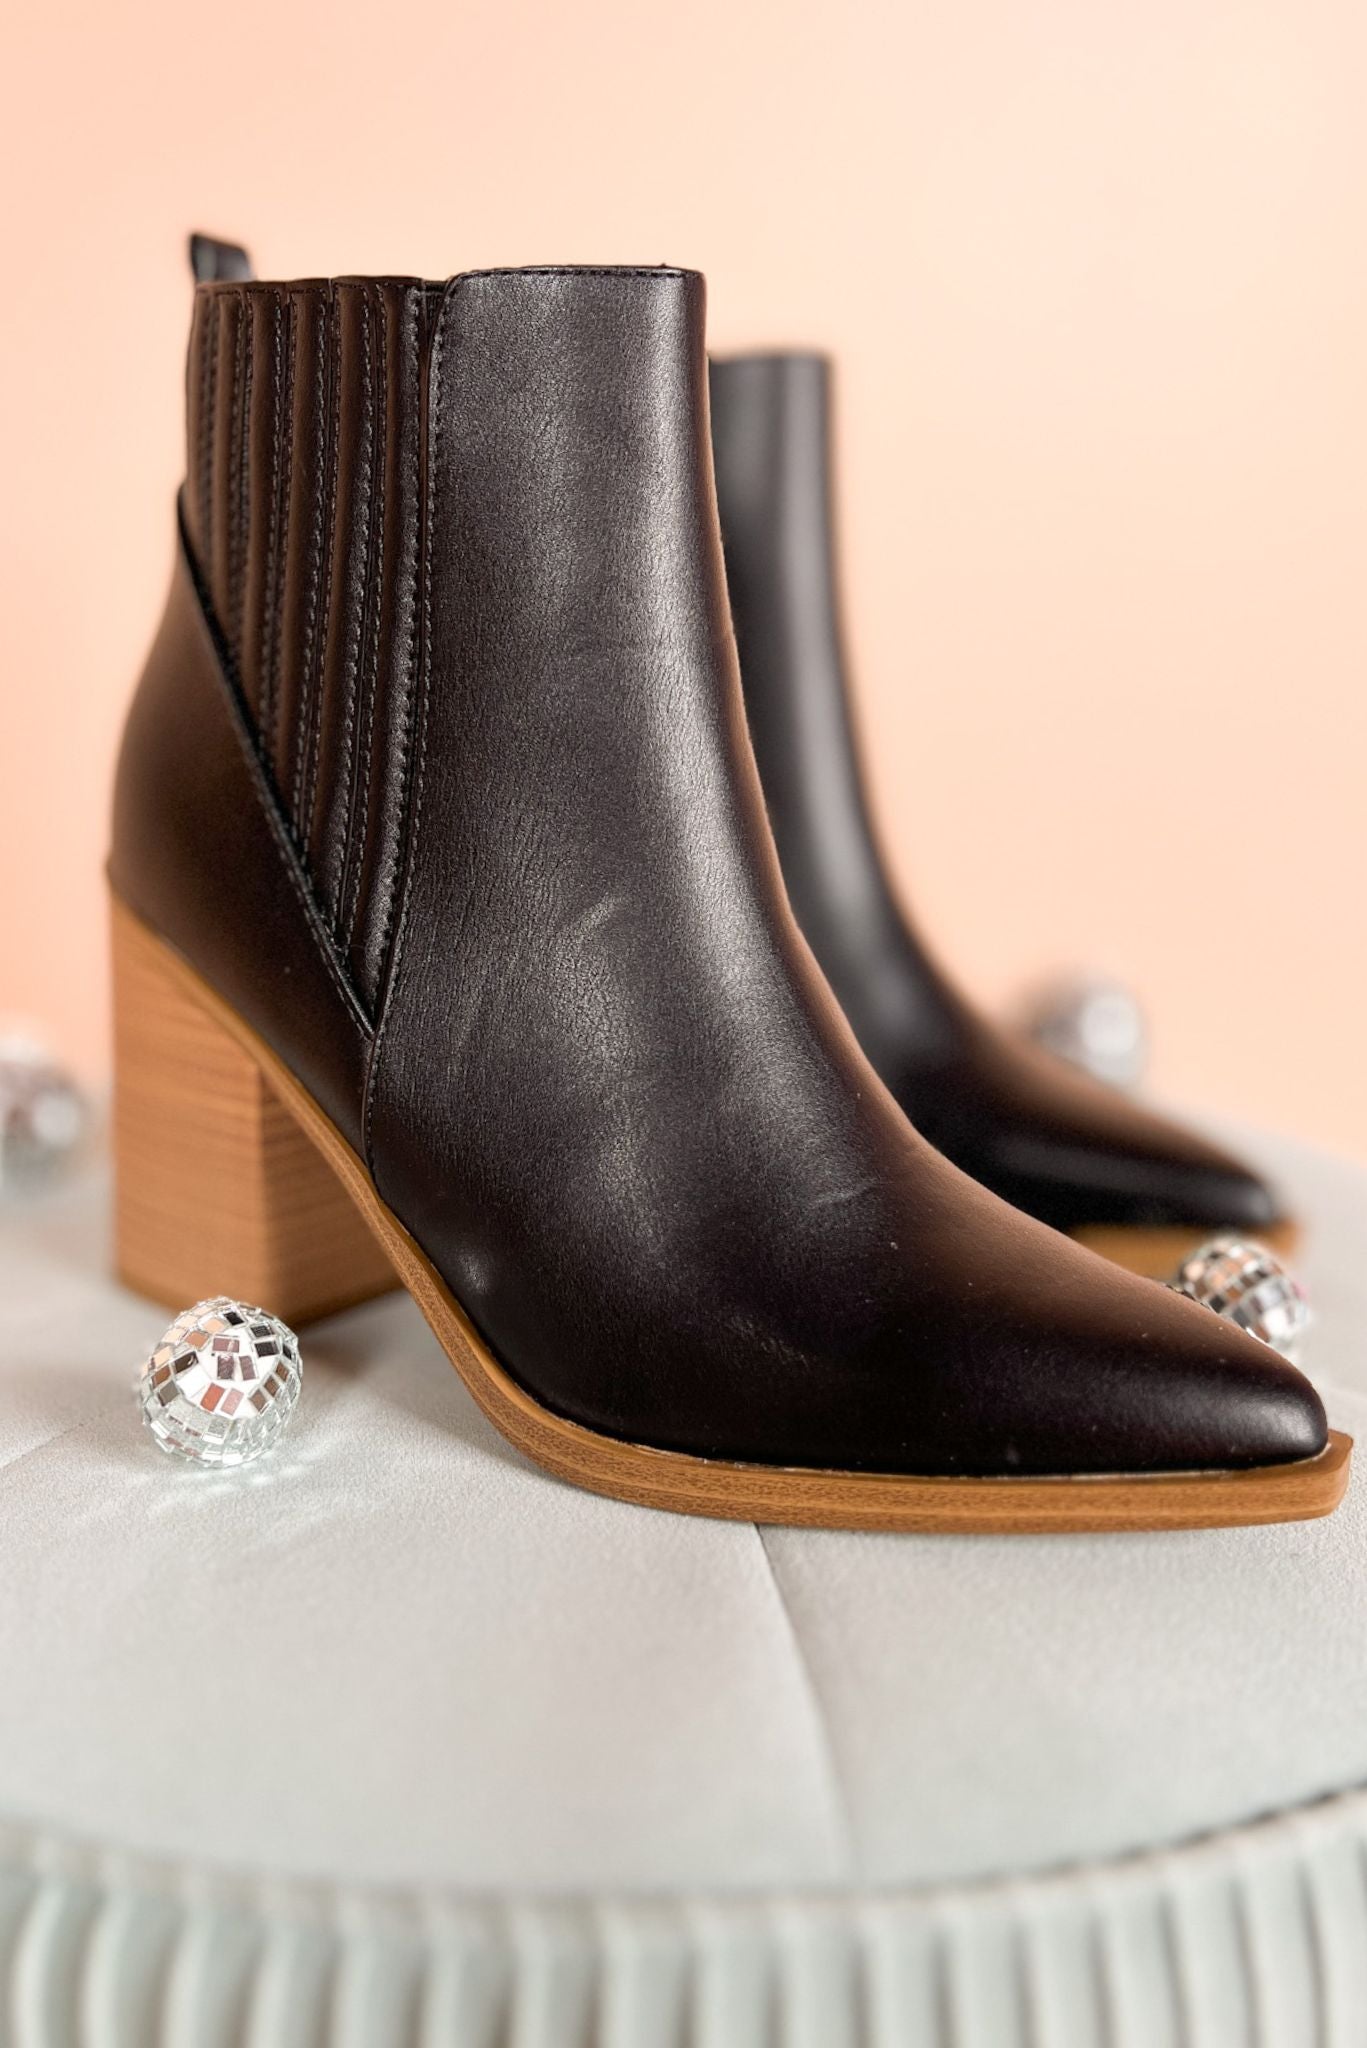  Black Pointed Toe Block Heel Booties, must have bootie, elebated bootie, fall bootie, fall shoes, mom style, shop style your senses by mallory fitzsimmons